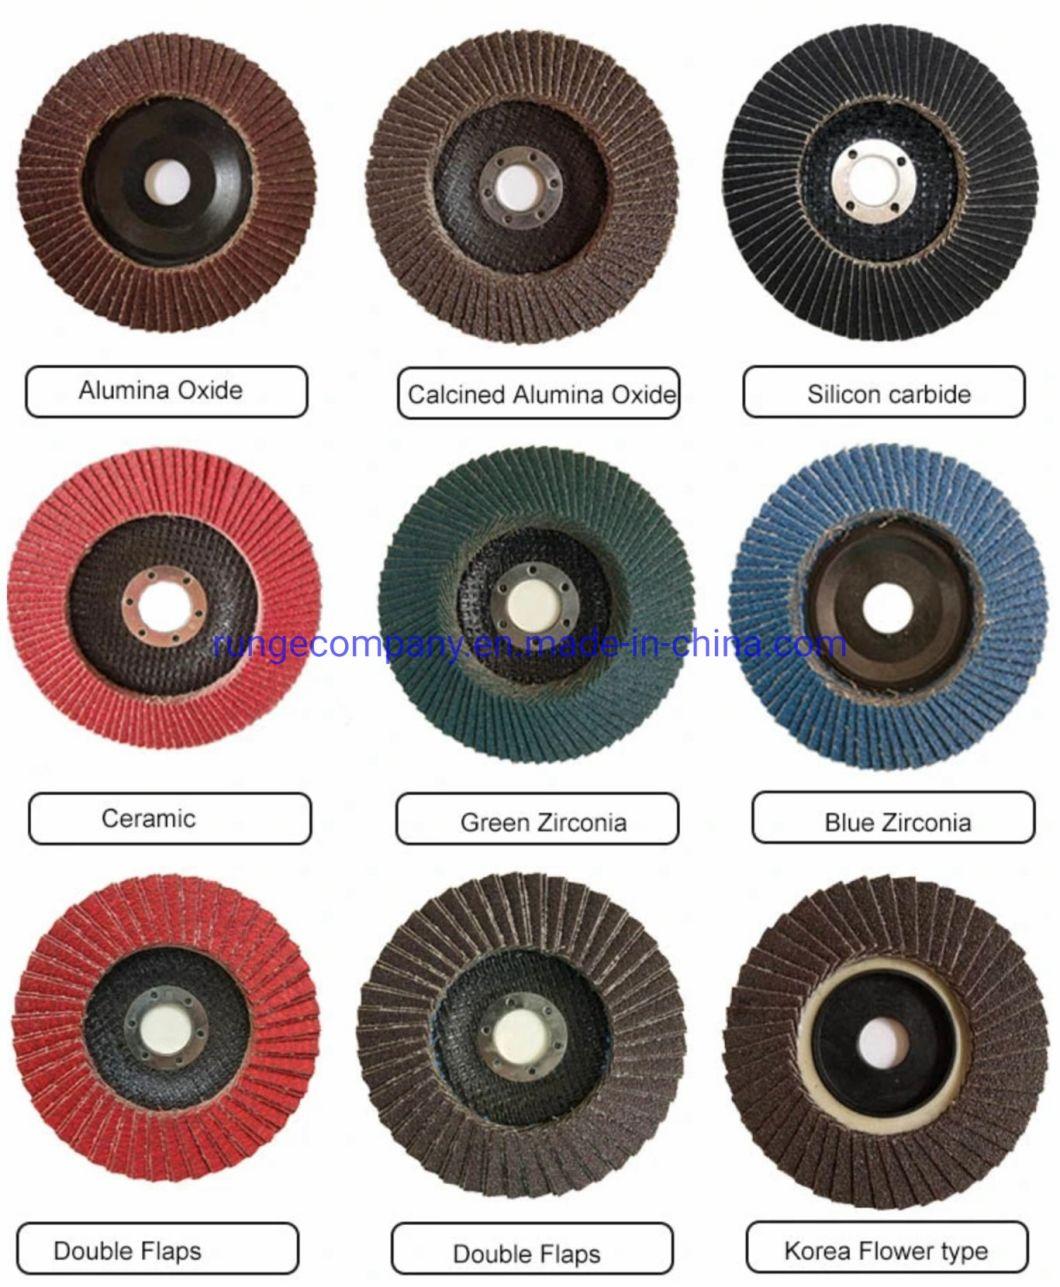 Alumina 2X1X1/4inch Internal Grinding Flap Wheels for Remove Rust and Weld Burr of Metal Stainless Steel Power Tools